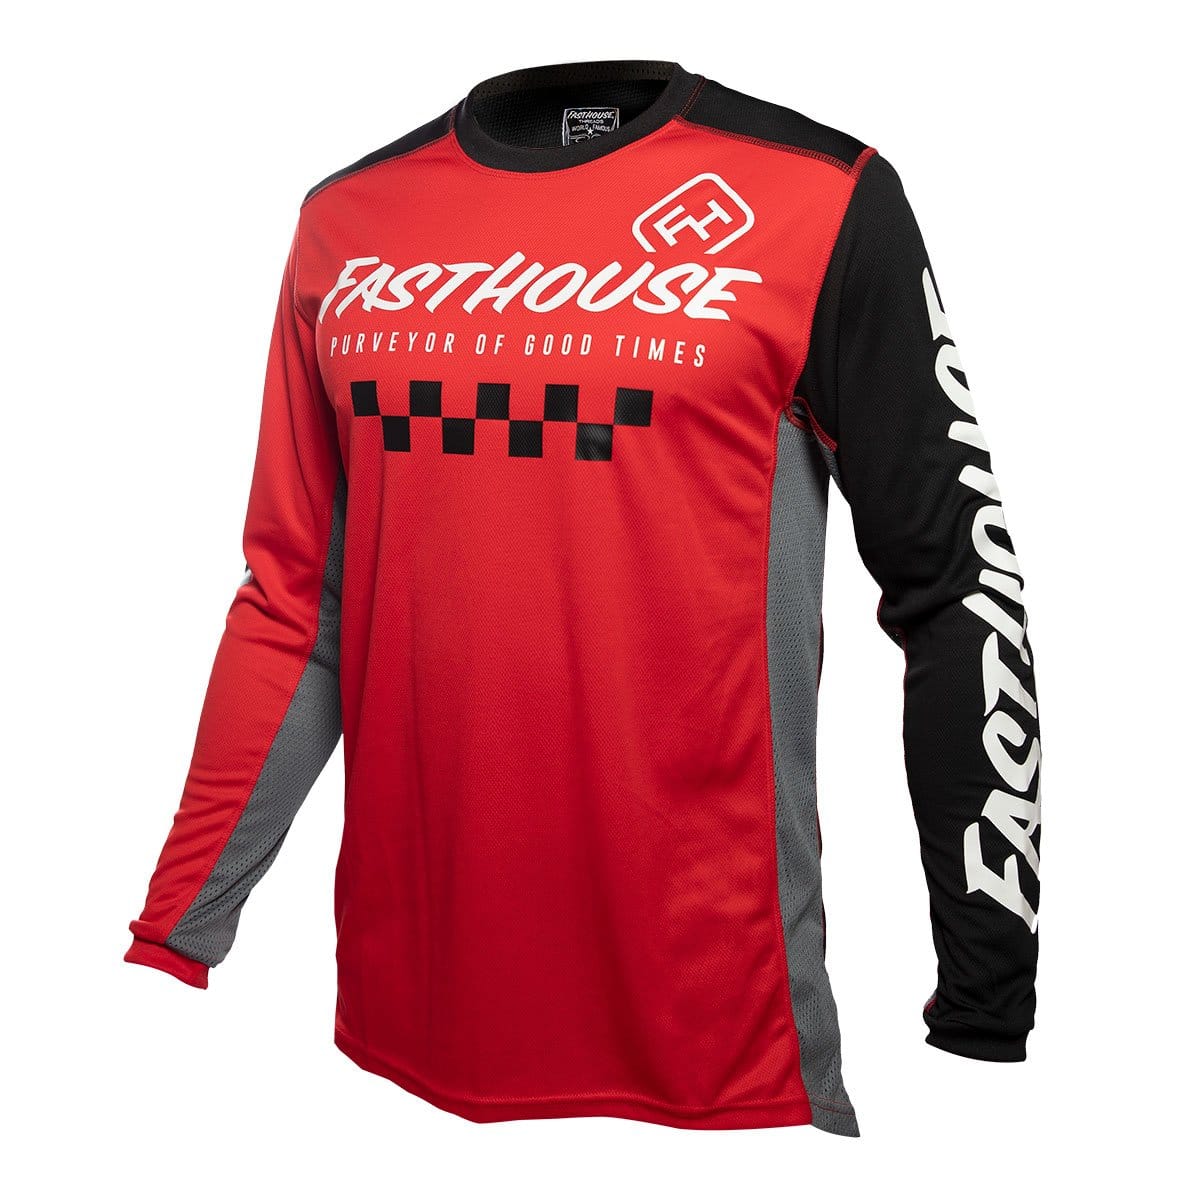 Rally Jersey - Red/Black